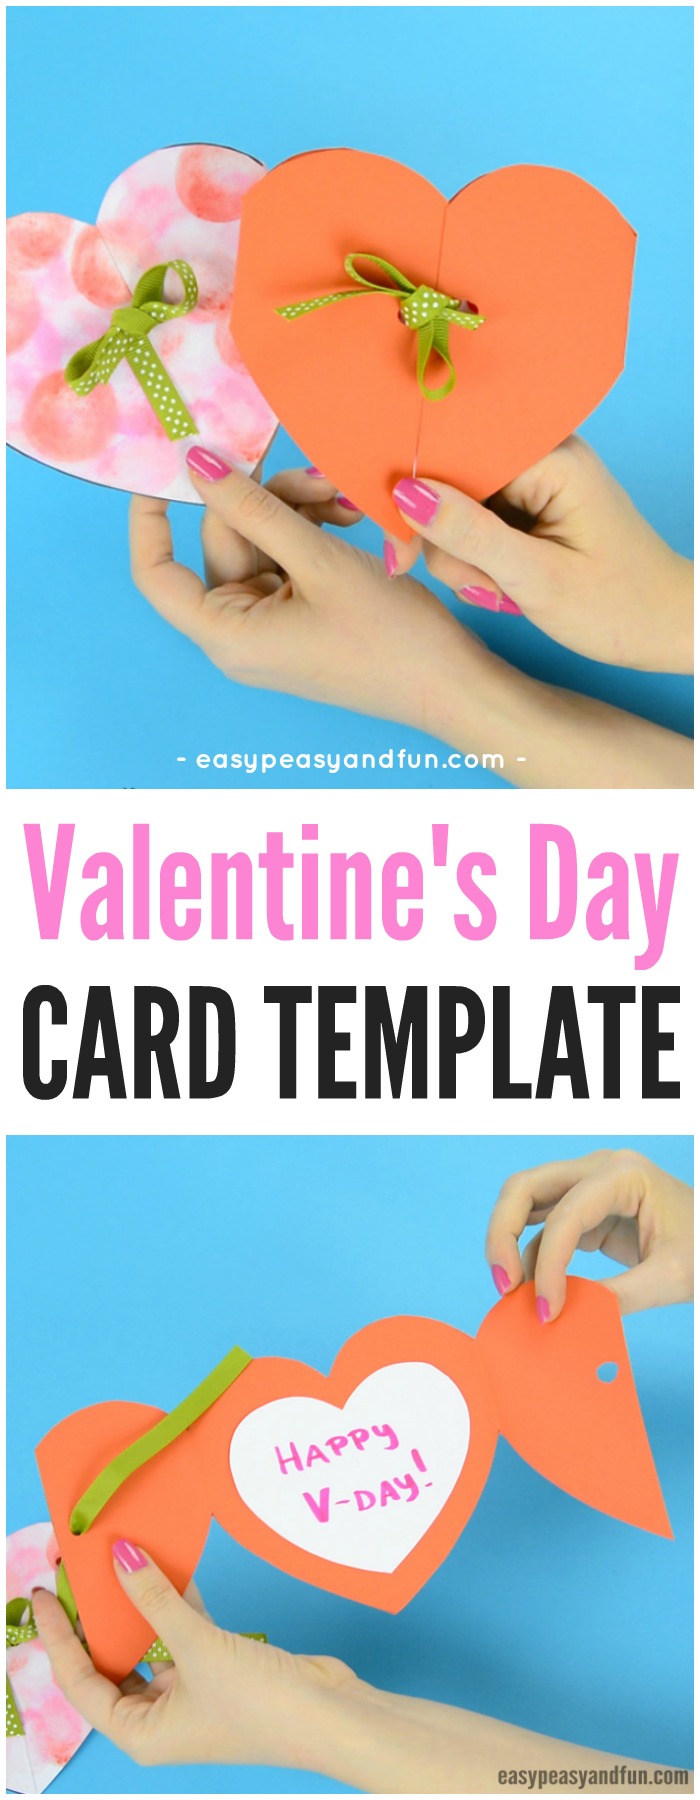 Valentine's Day Heart Card Craft with Template #craftsforkids #Valentinesdaycraftsforkids #heartcraftsforkids